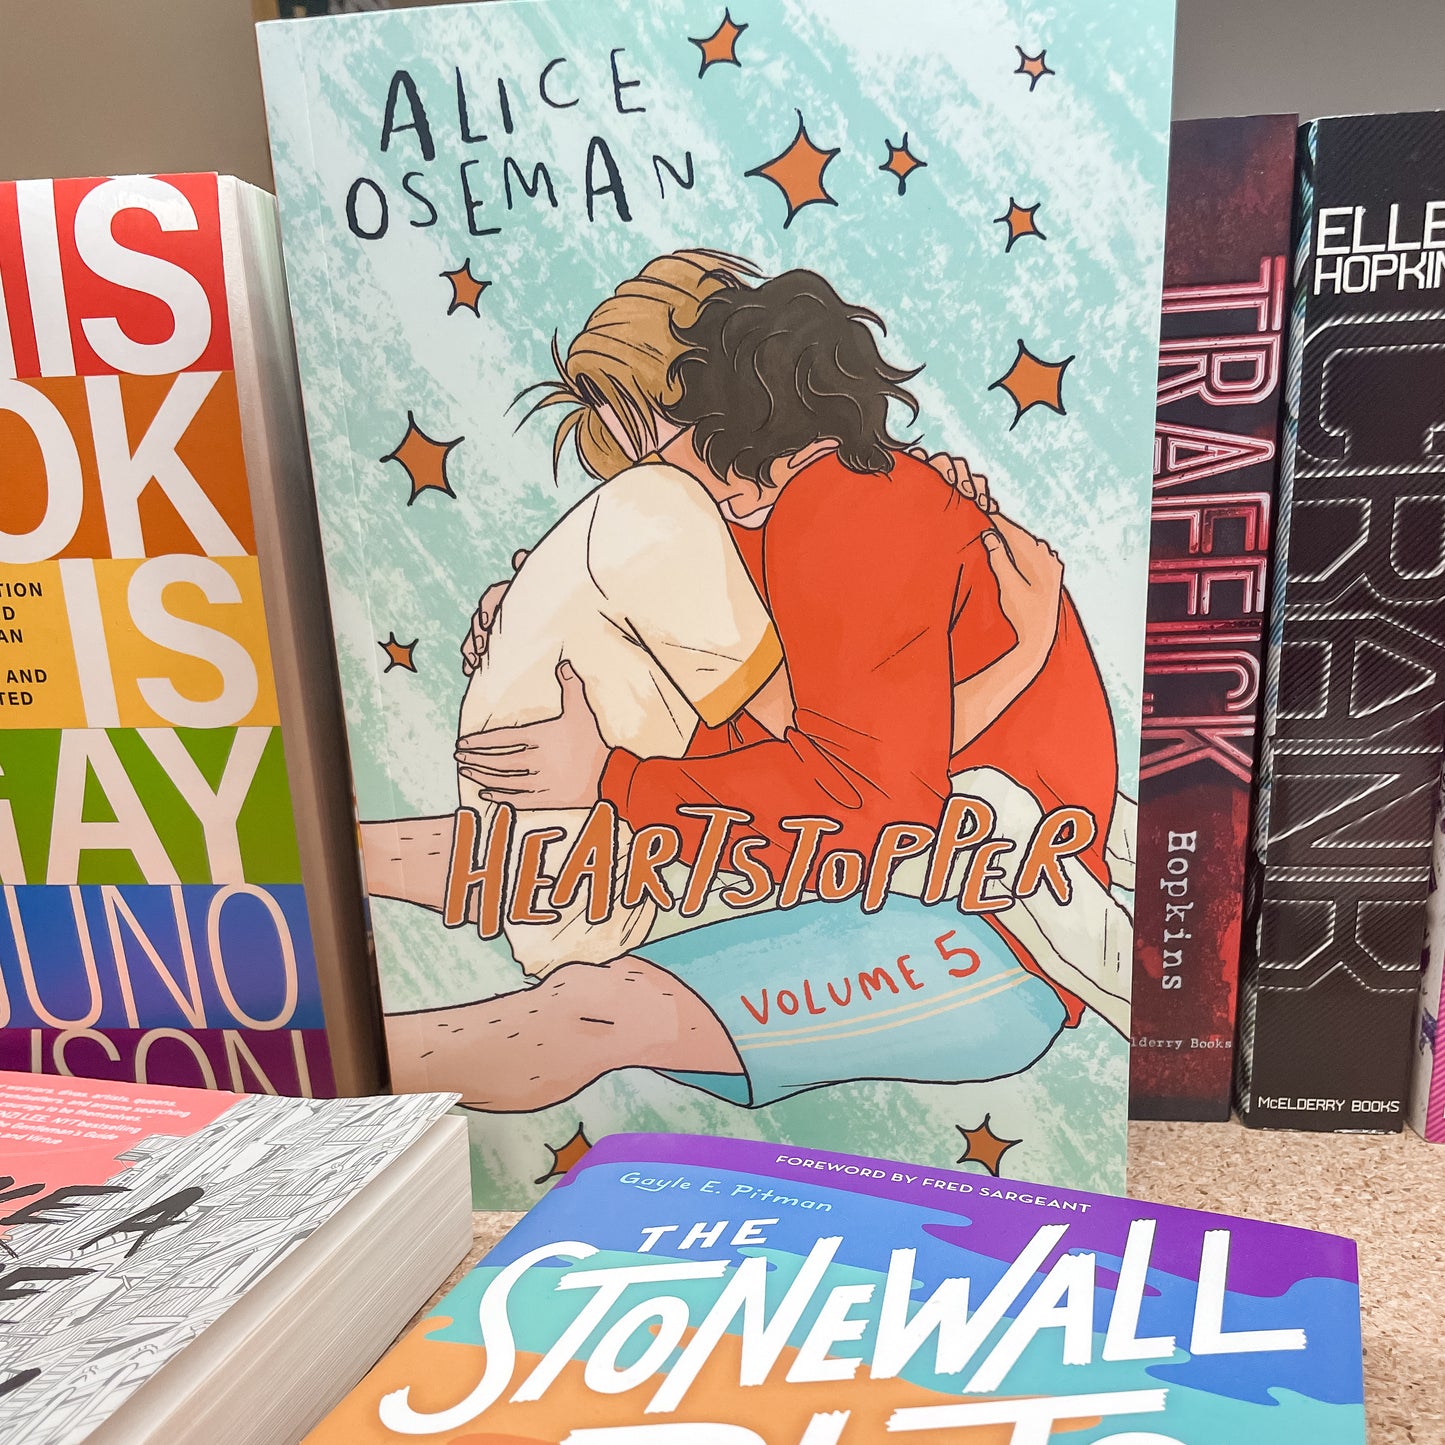 Heartstopper #5: A Graphic Novel by Alice Oseman – White Rose Books & More